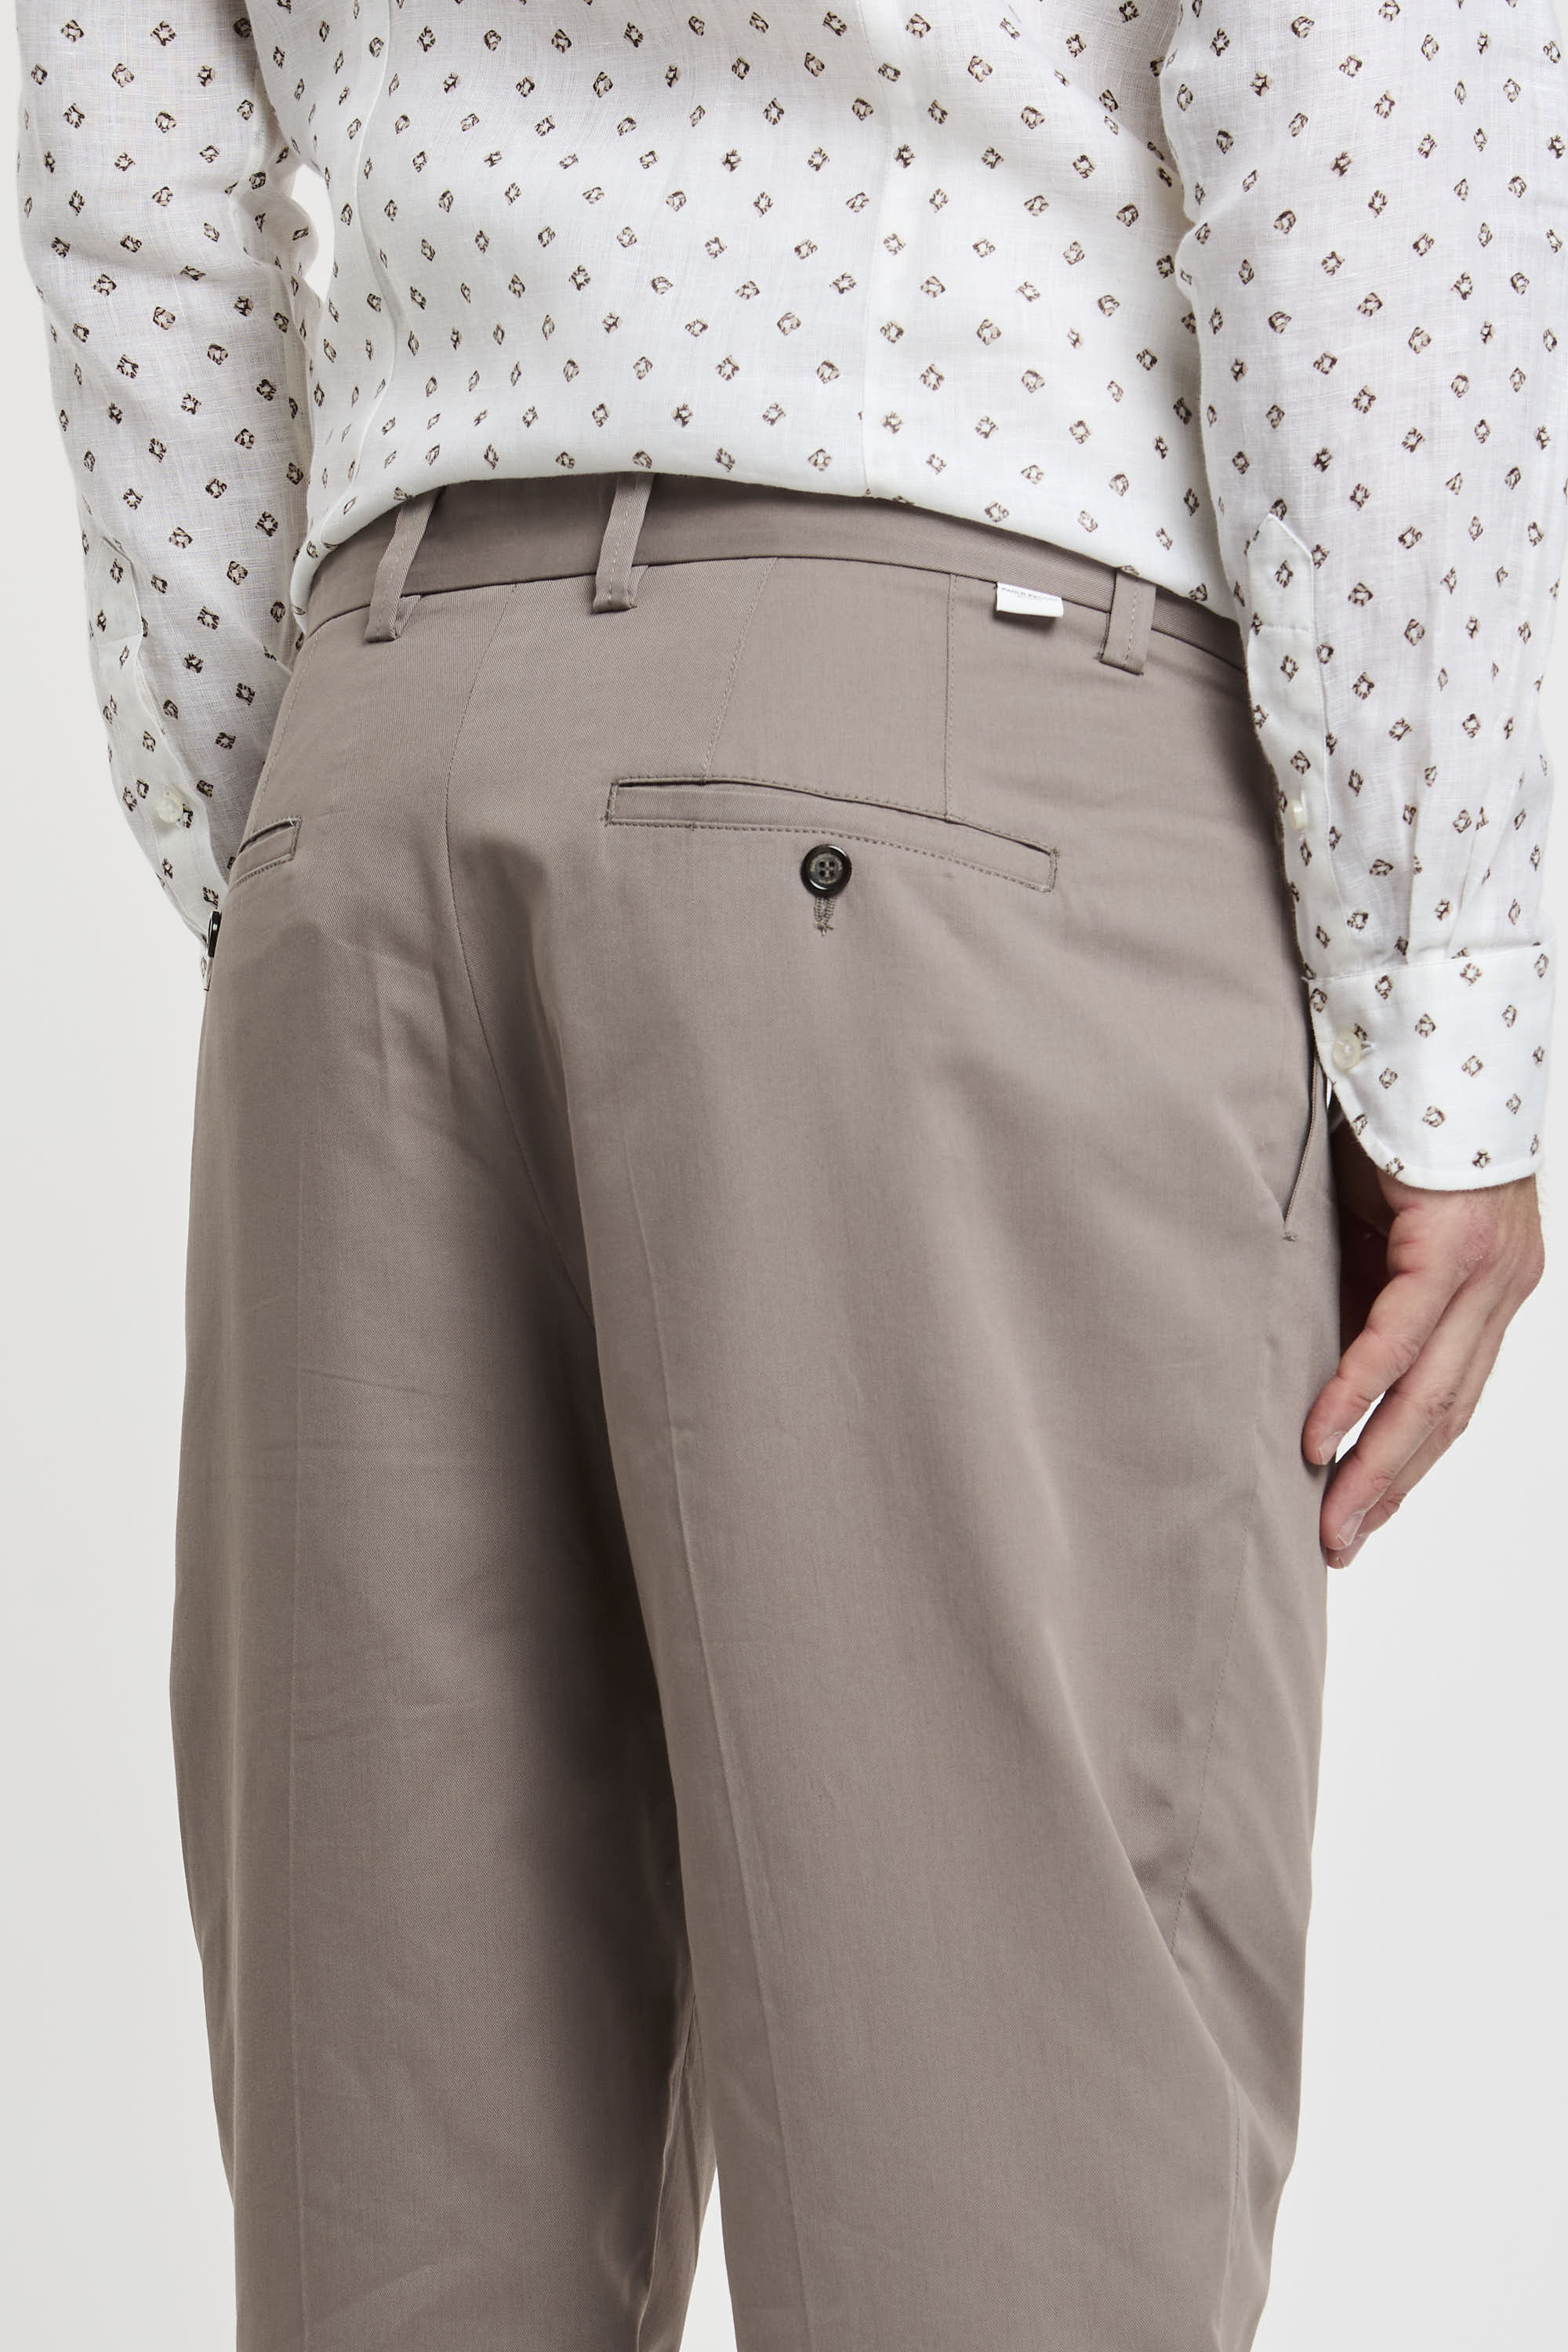 Paolo Pecora Cotton Blend Chino Trousers in Taupe-6